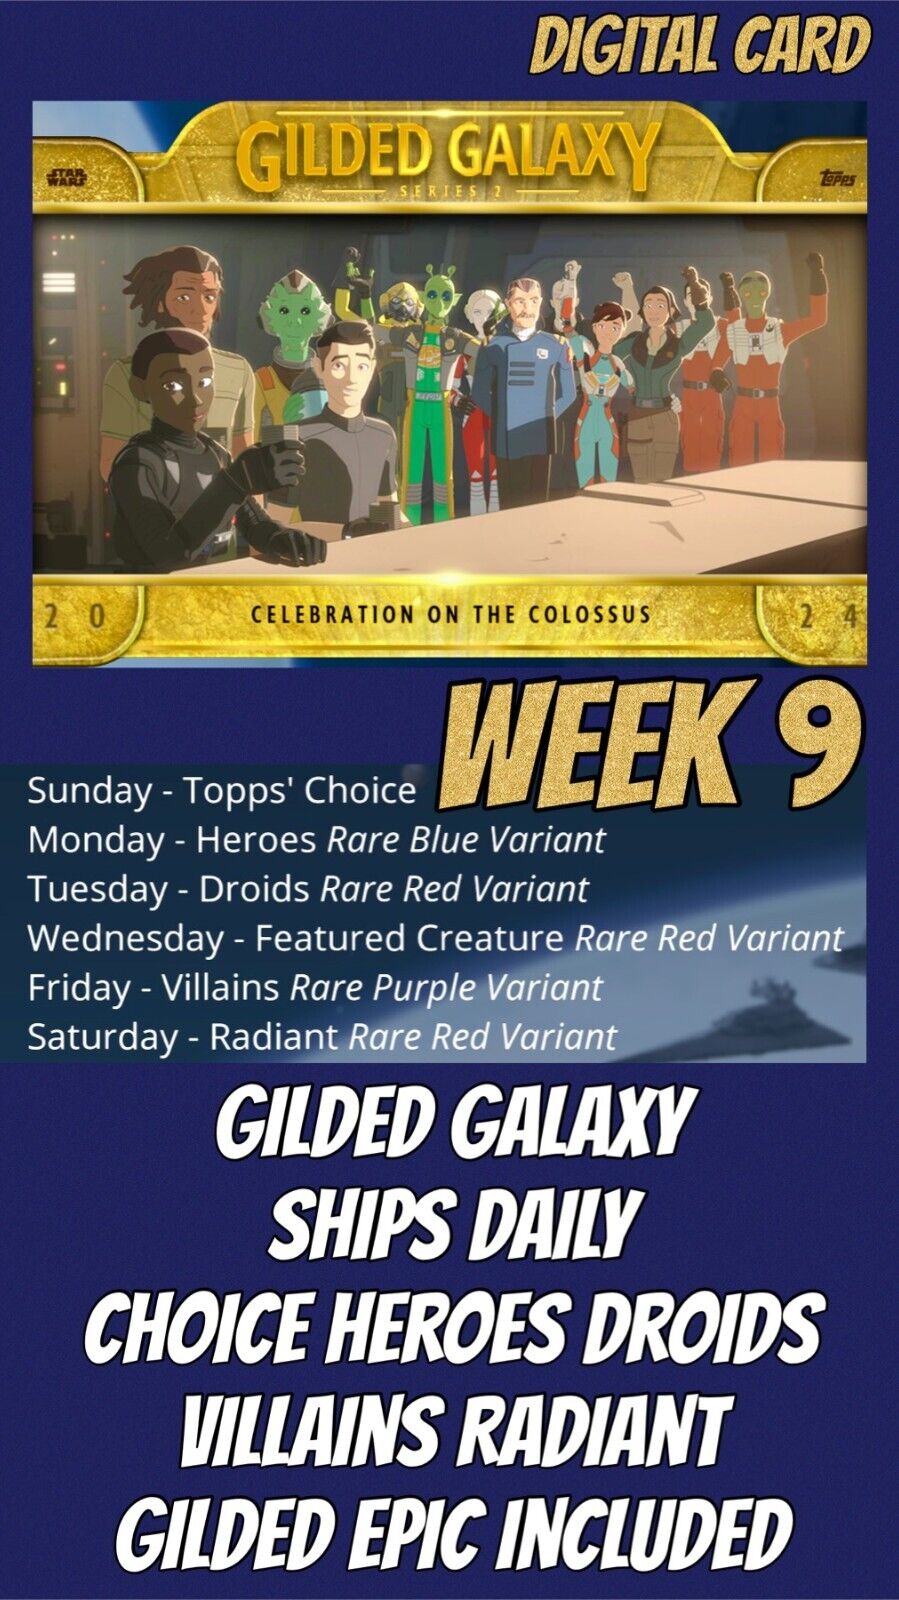 Topps Star Wars Card Trader GILDED GALAXY Week 9 All Epic Gilded Rare UC 18 Card